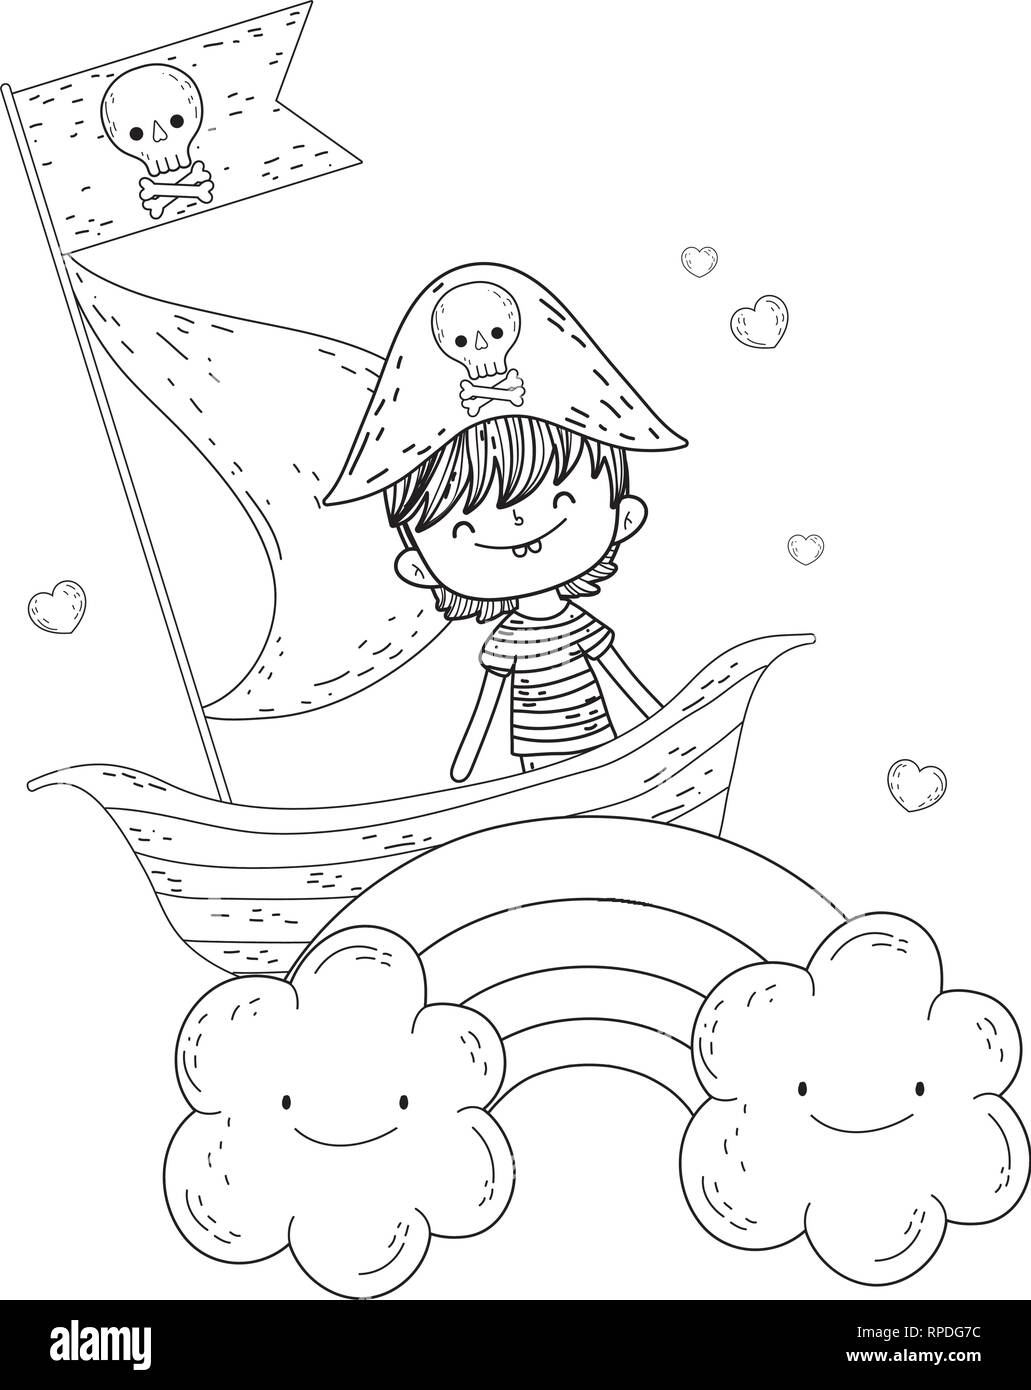 little pirate in boat with rainbow Stock Vector